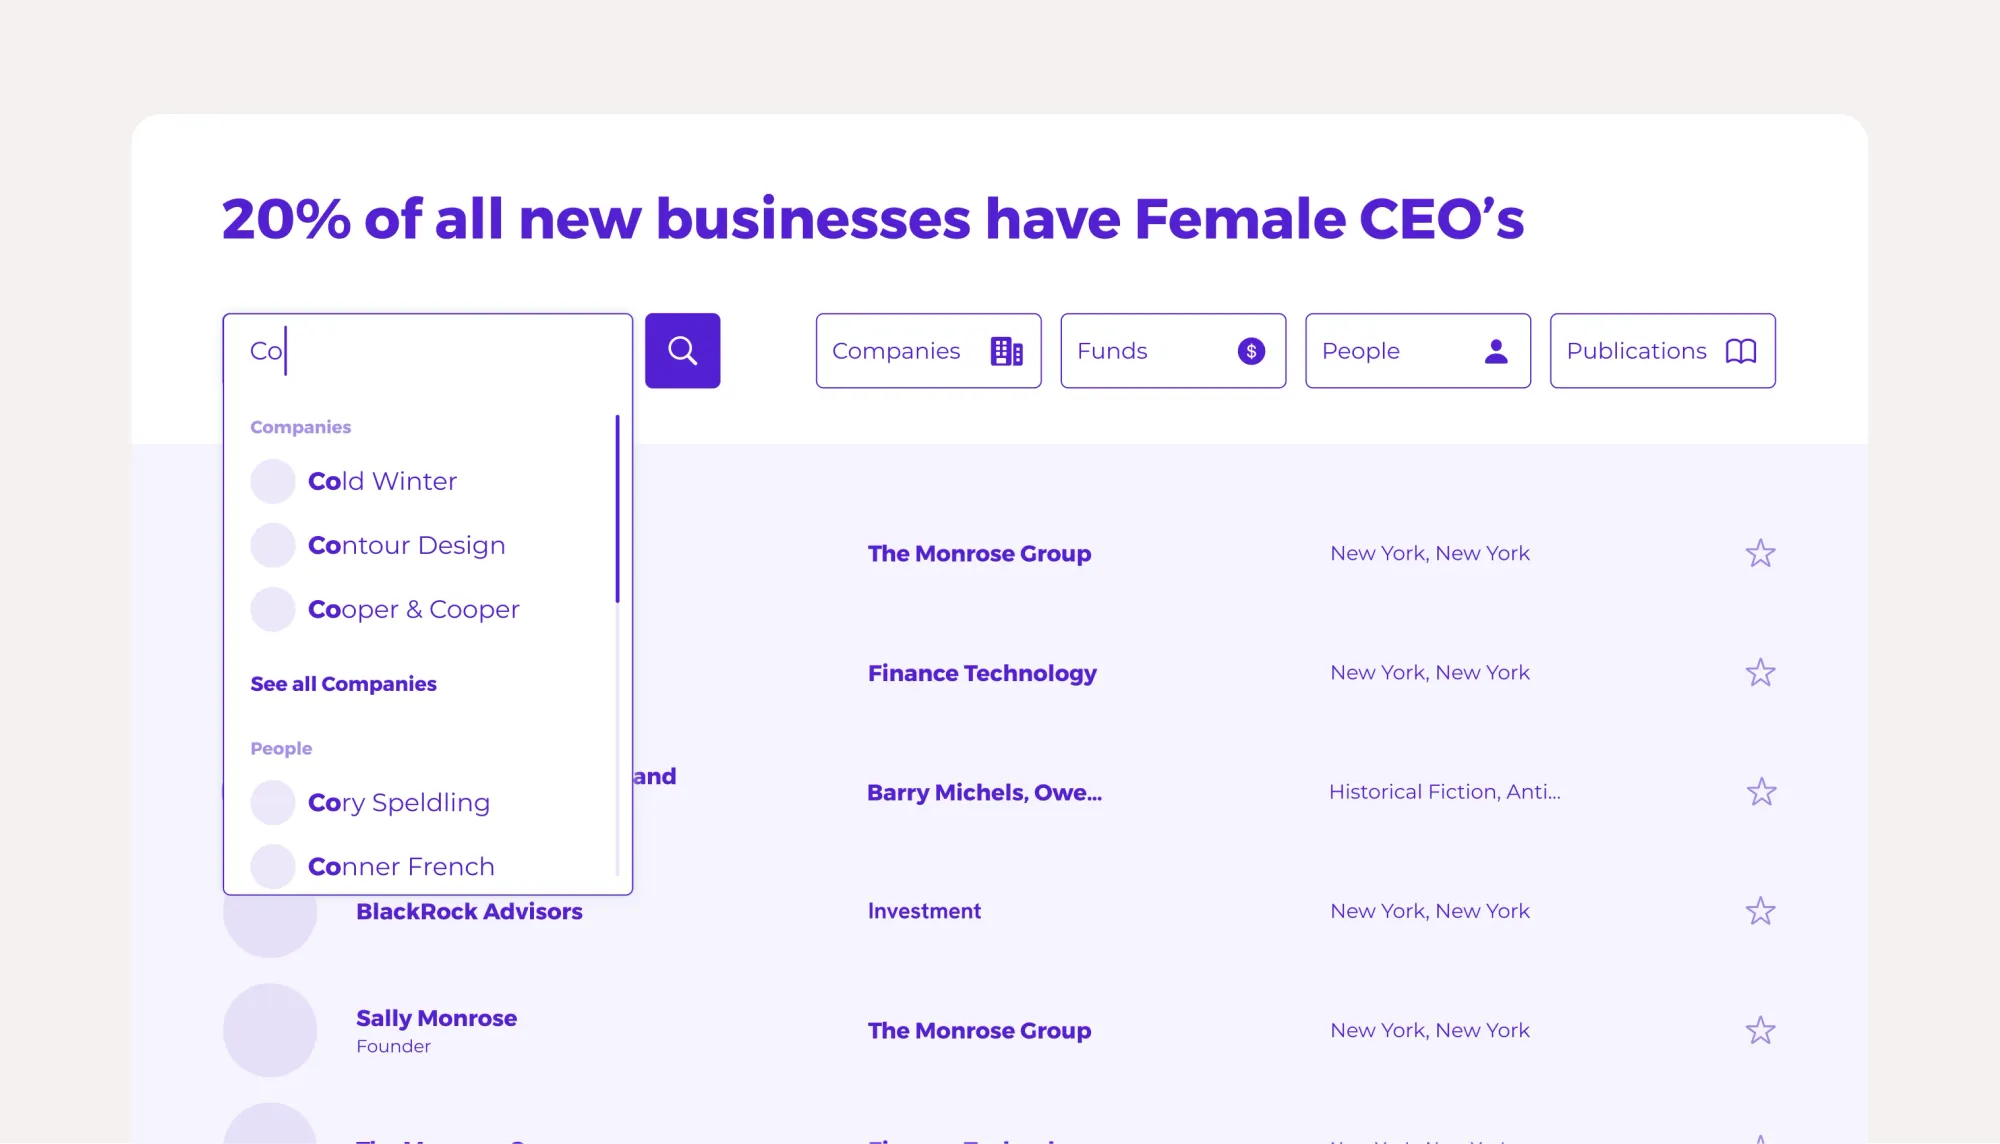 A search page highlighting that '20% of all new businesses have Female CEOs', with a dropdown menu listing companies like Cold Winter, Contour Design, and Cooper & Cooper.